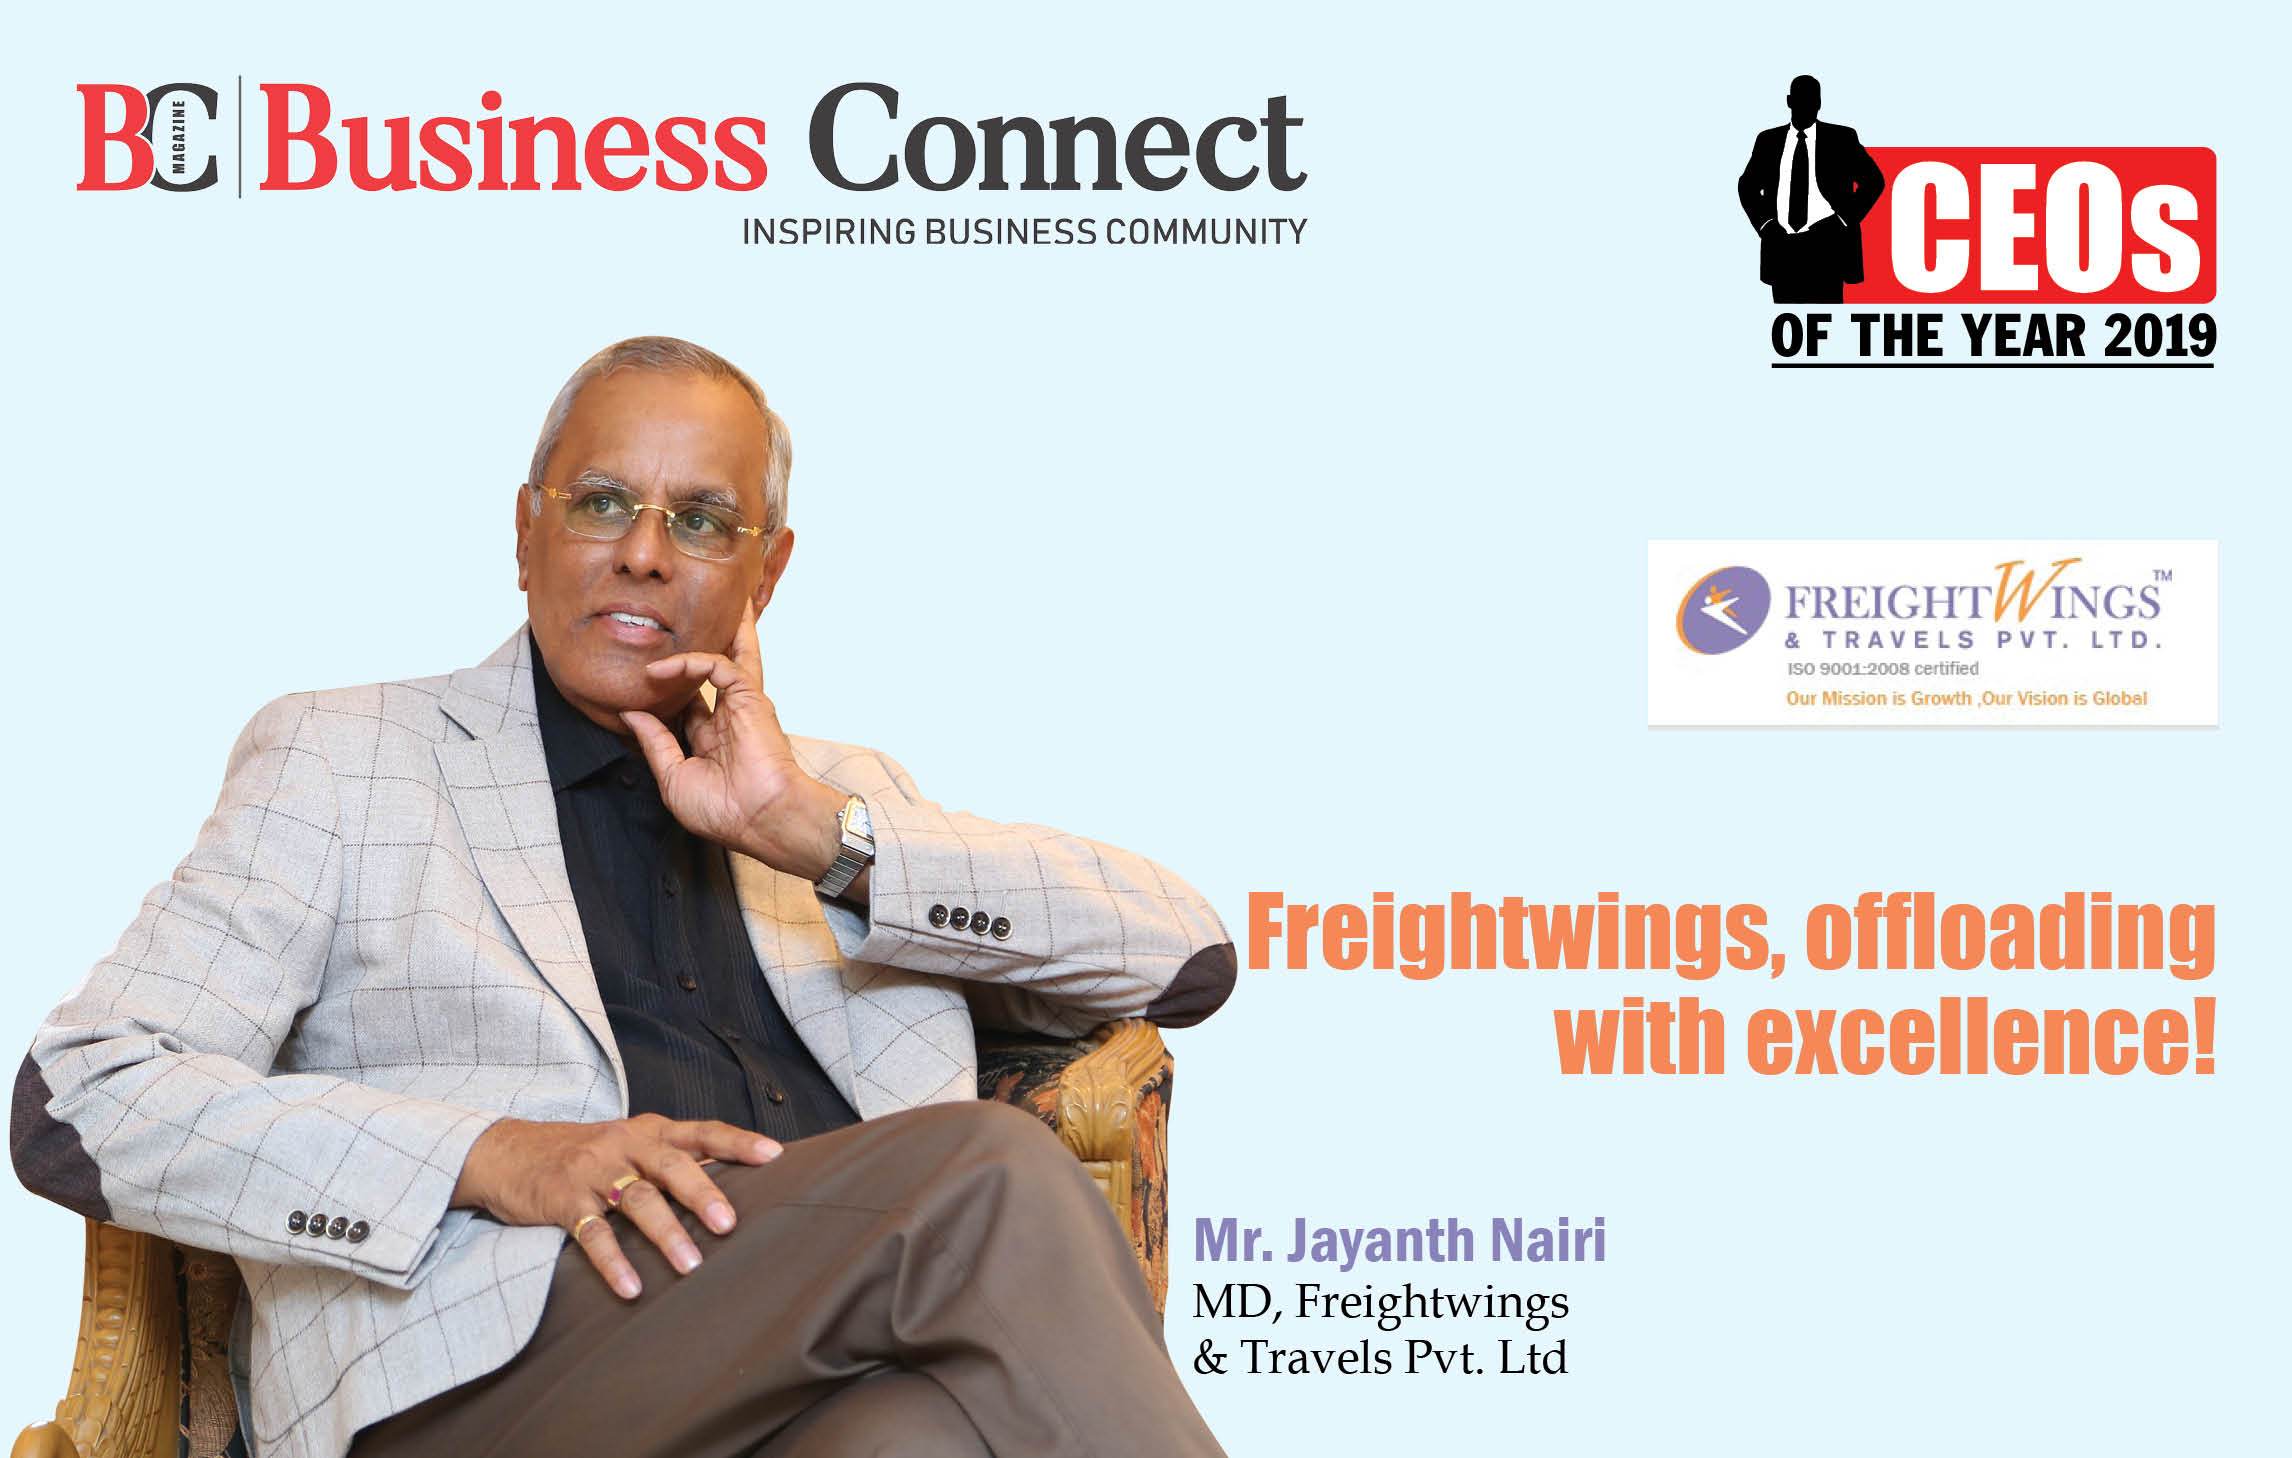 Freightwings, offloading with excellence - Business Connect